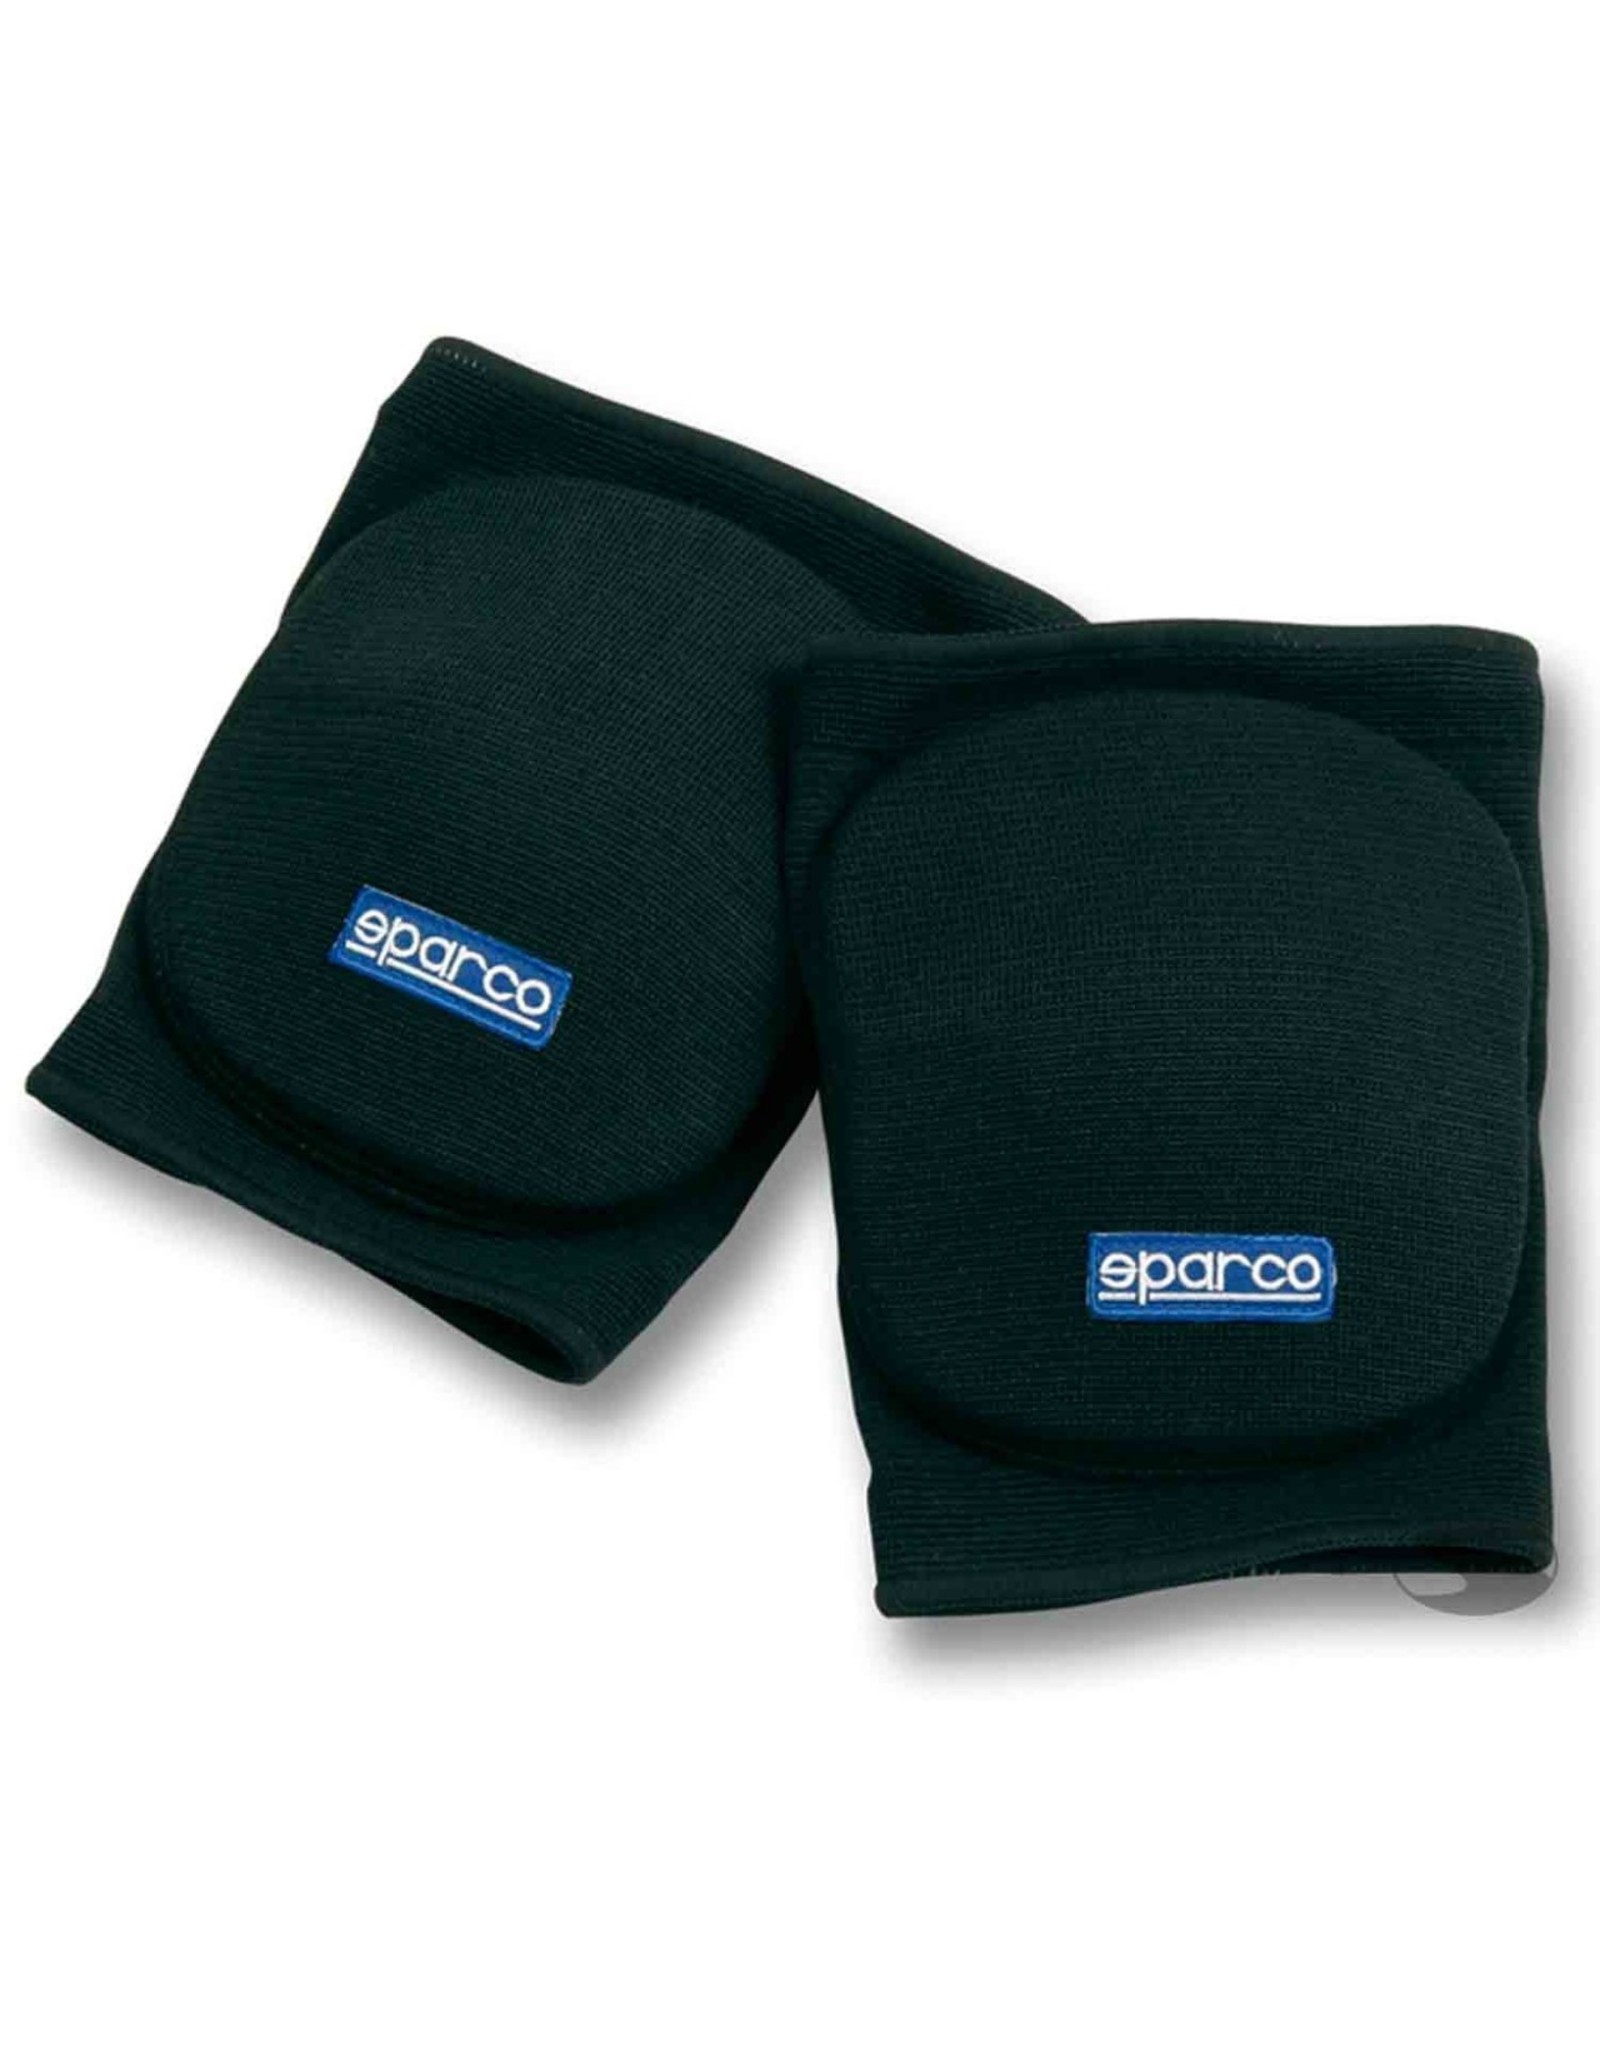 Sparco Sparco Elbow protector pads